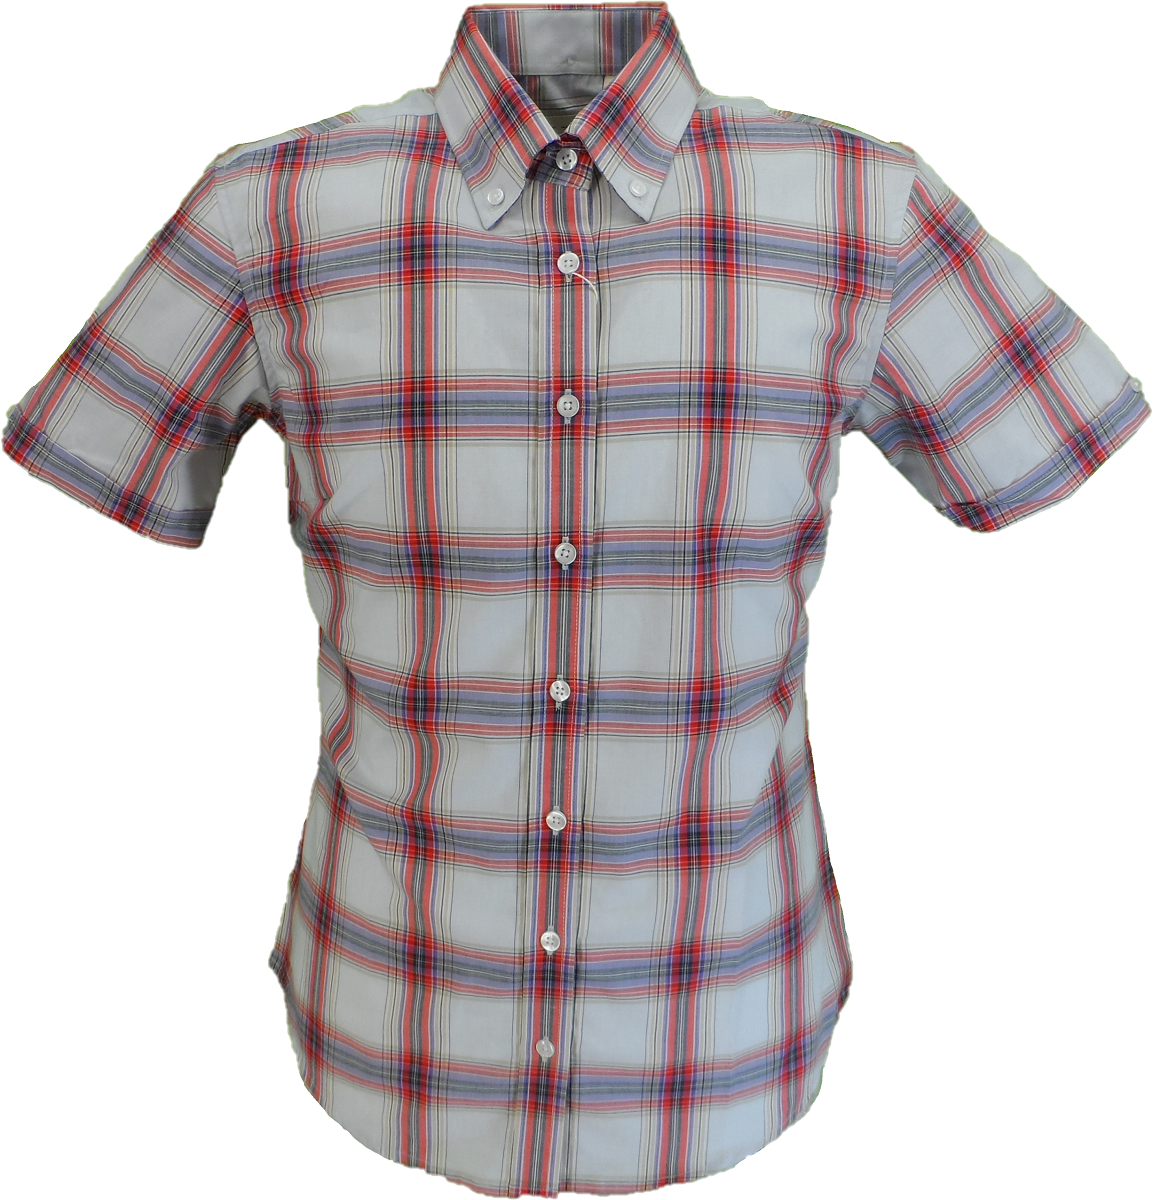 Relco Ladies Retro White Check Button Down Short Sleeved Shirts